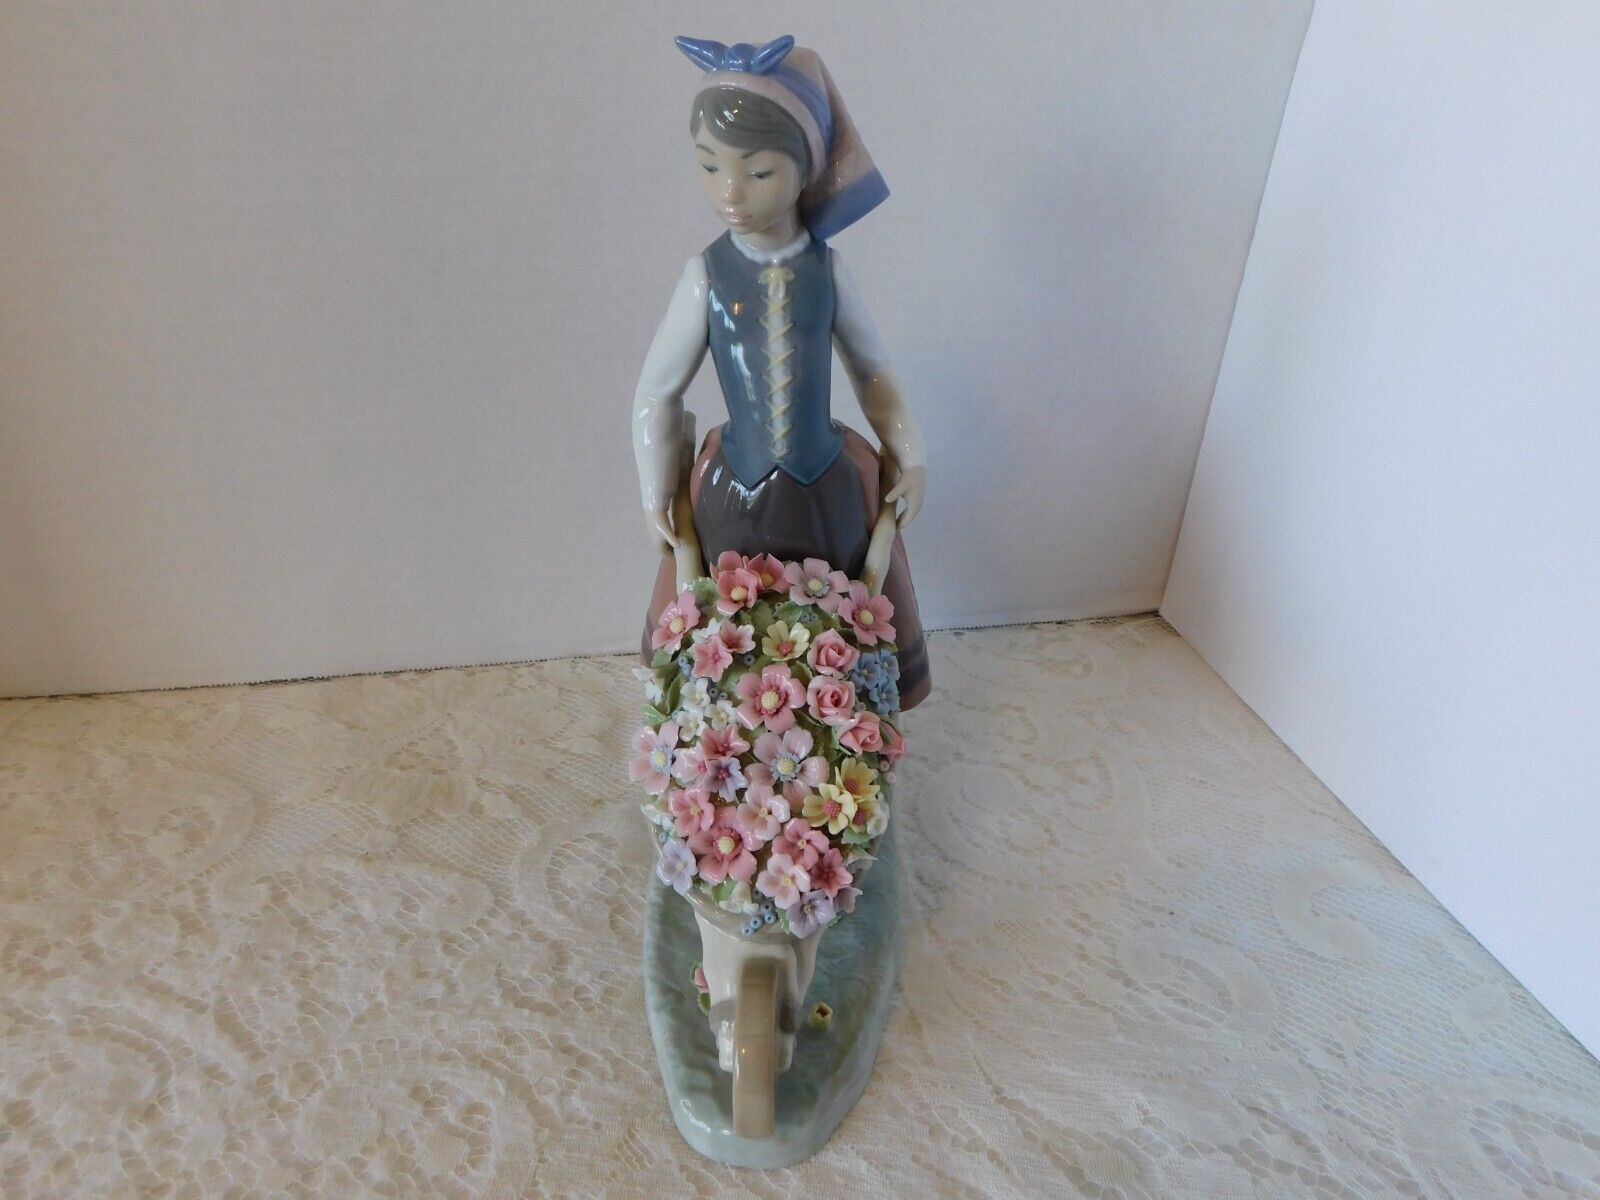 STUNNING LLADRO SPAIN FIGURINE #01419 A BARROW OF BLOSSOMS - GREAT CONDITION